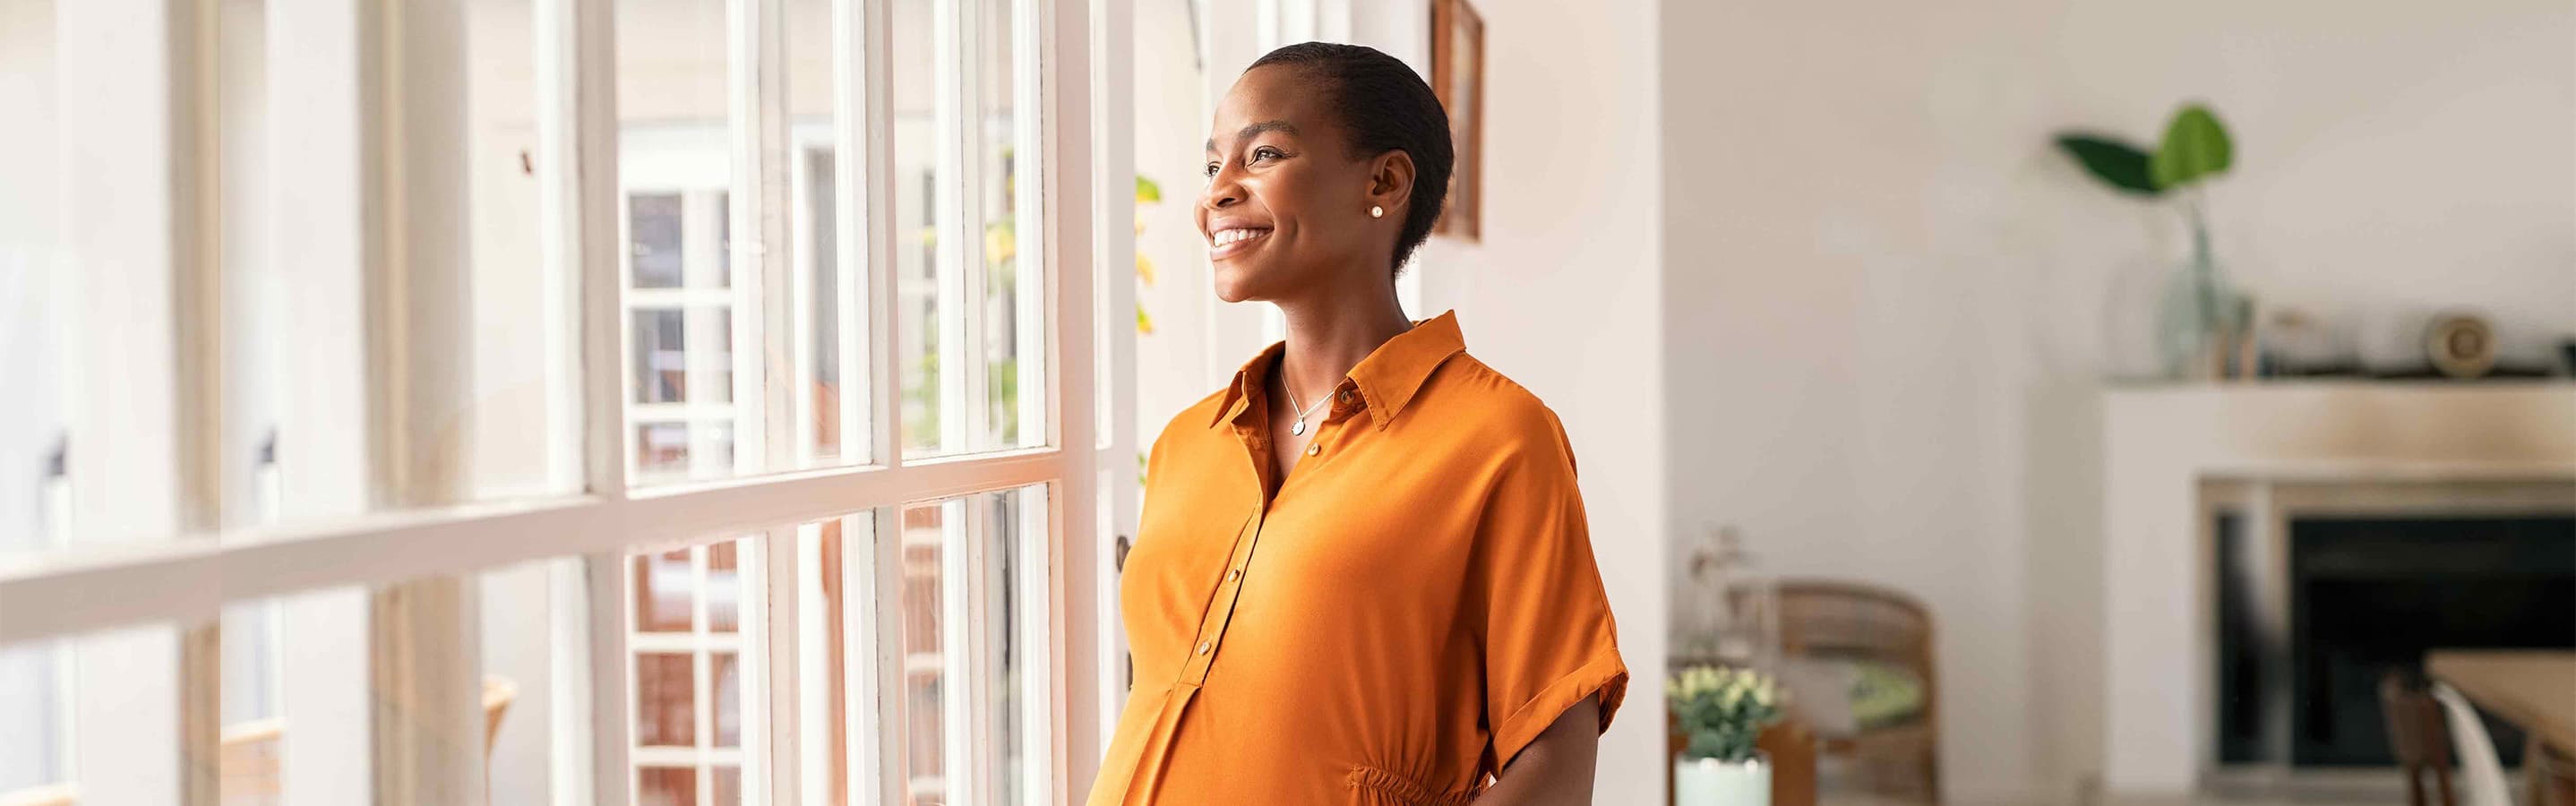 Pregnant woman in an orange dress looking out of the window smiling